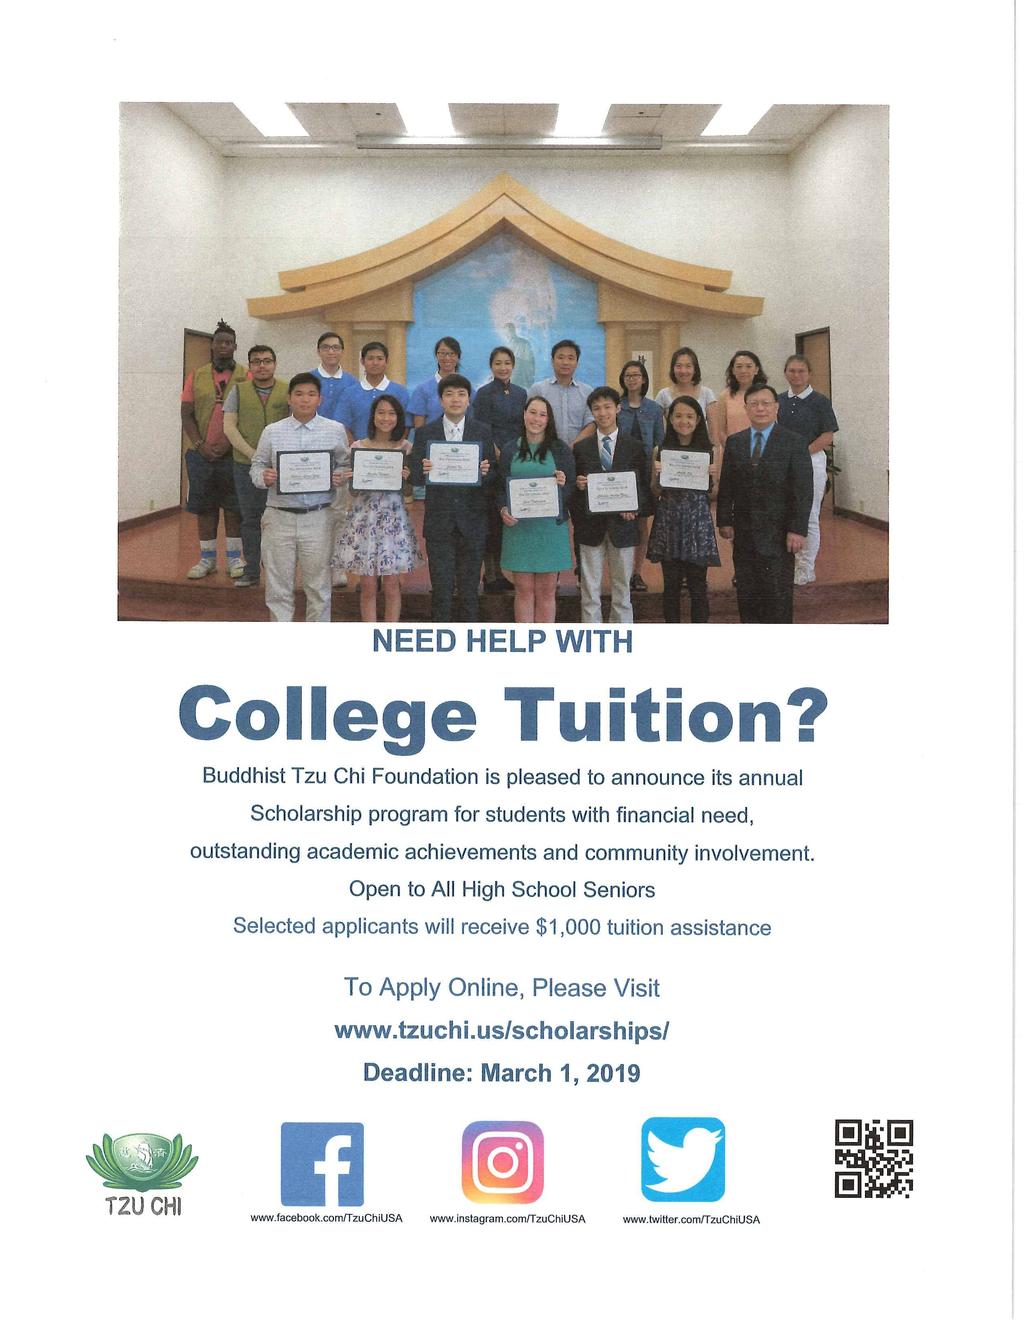 NEED HELP WITH College Tuition?